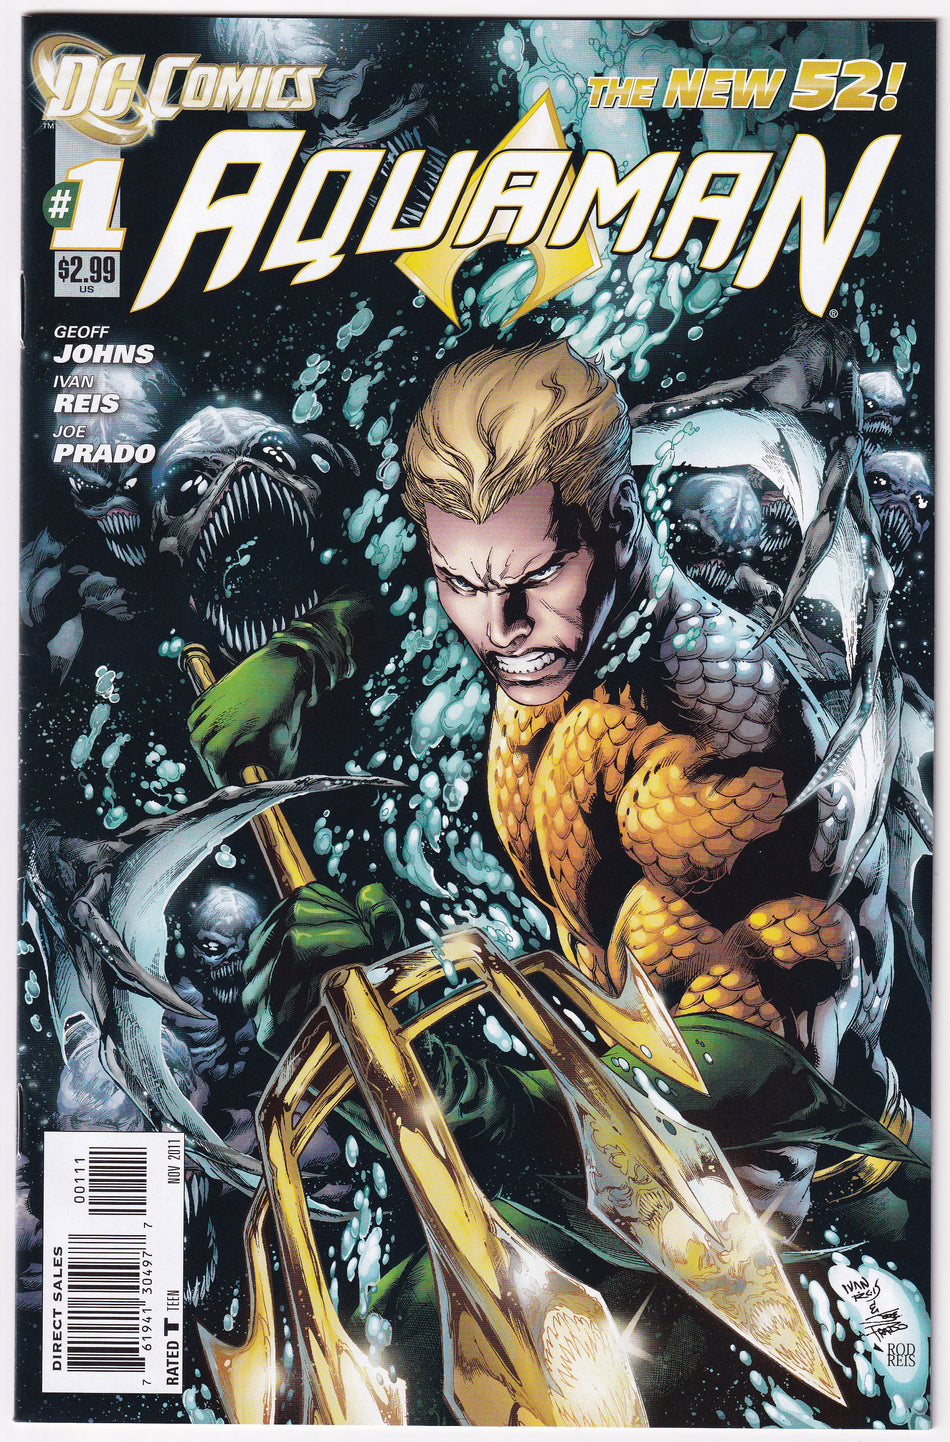 Photo of NM Aquaman V7 (11) 1A Geoff Johns, Ivan Reis, Joe Prado Comic sold by Stronghold Collectibles